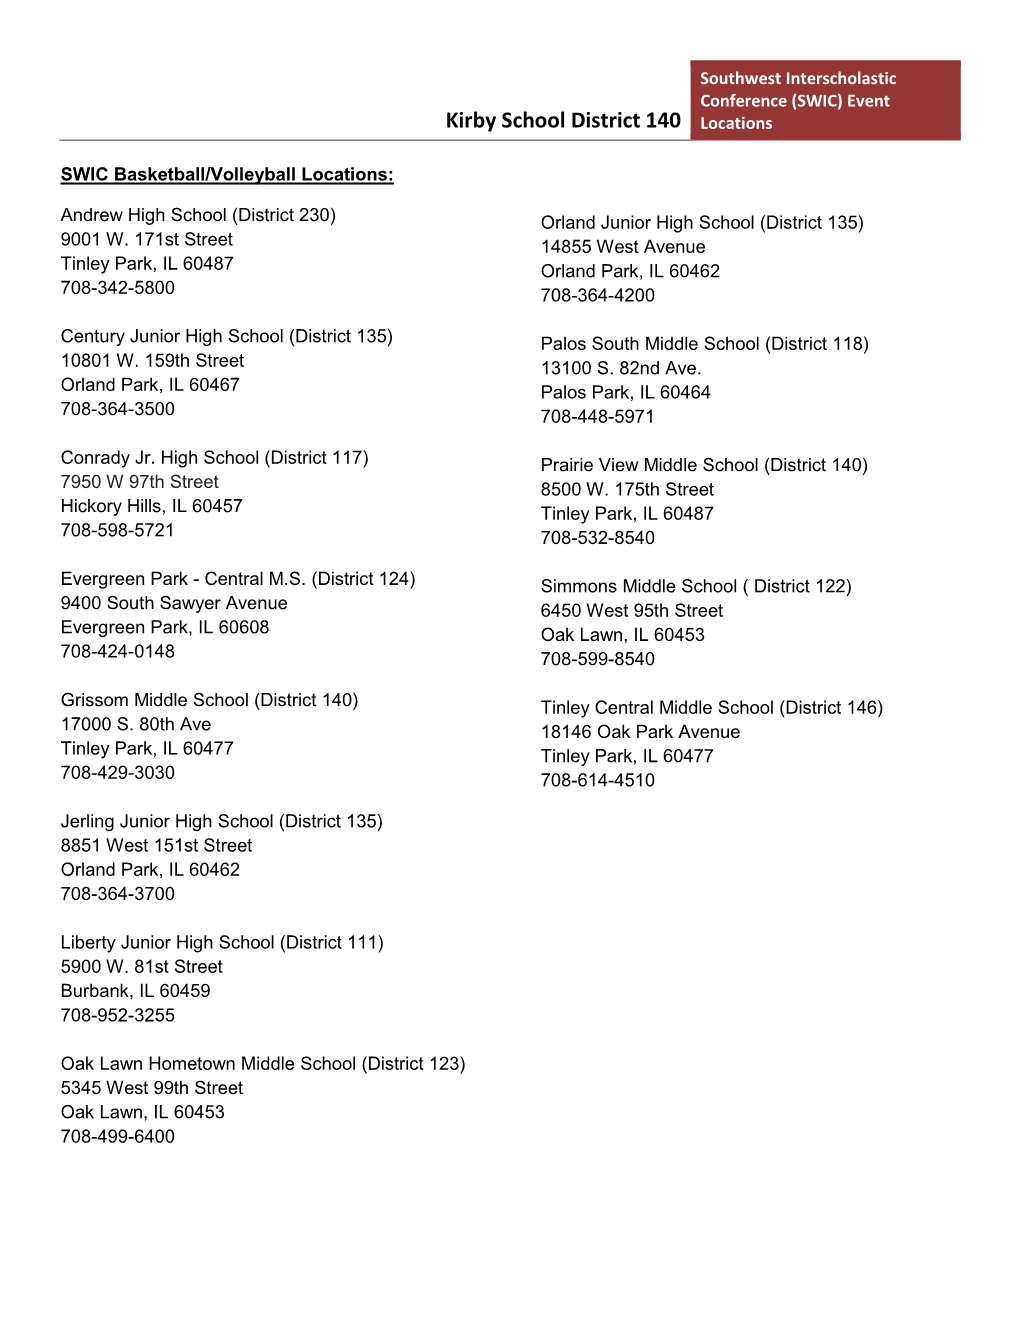 Southwest Interscholastic Conference (SWIC) Event Kirby School District 140 Locations